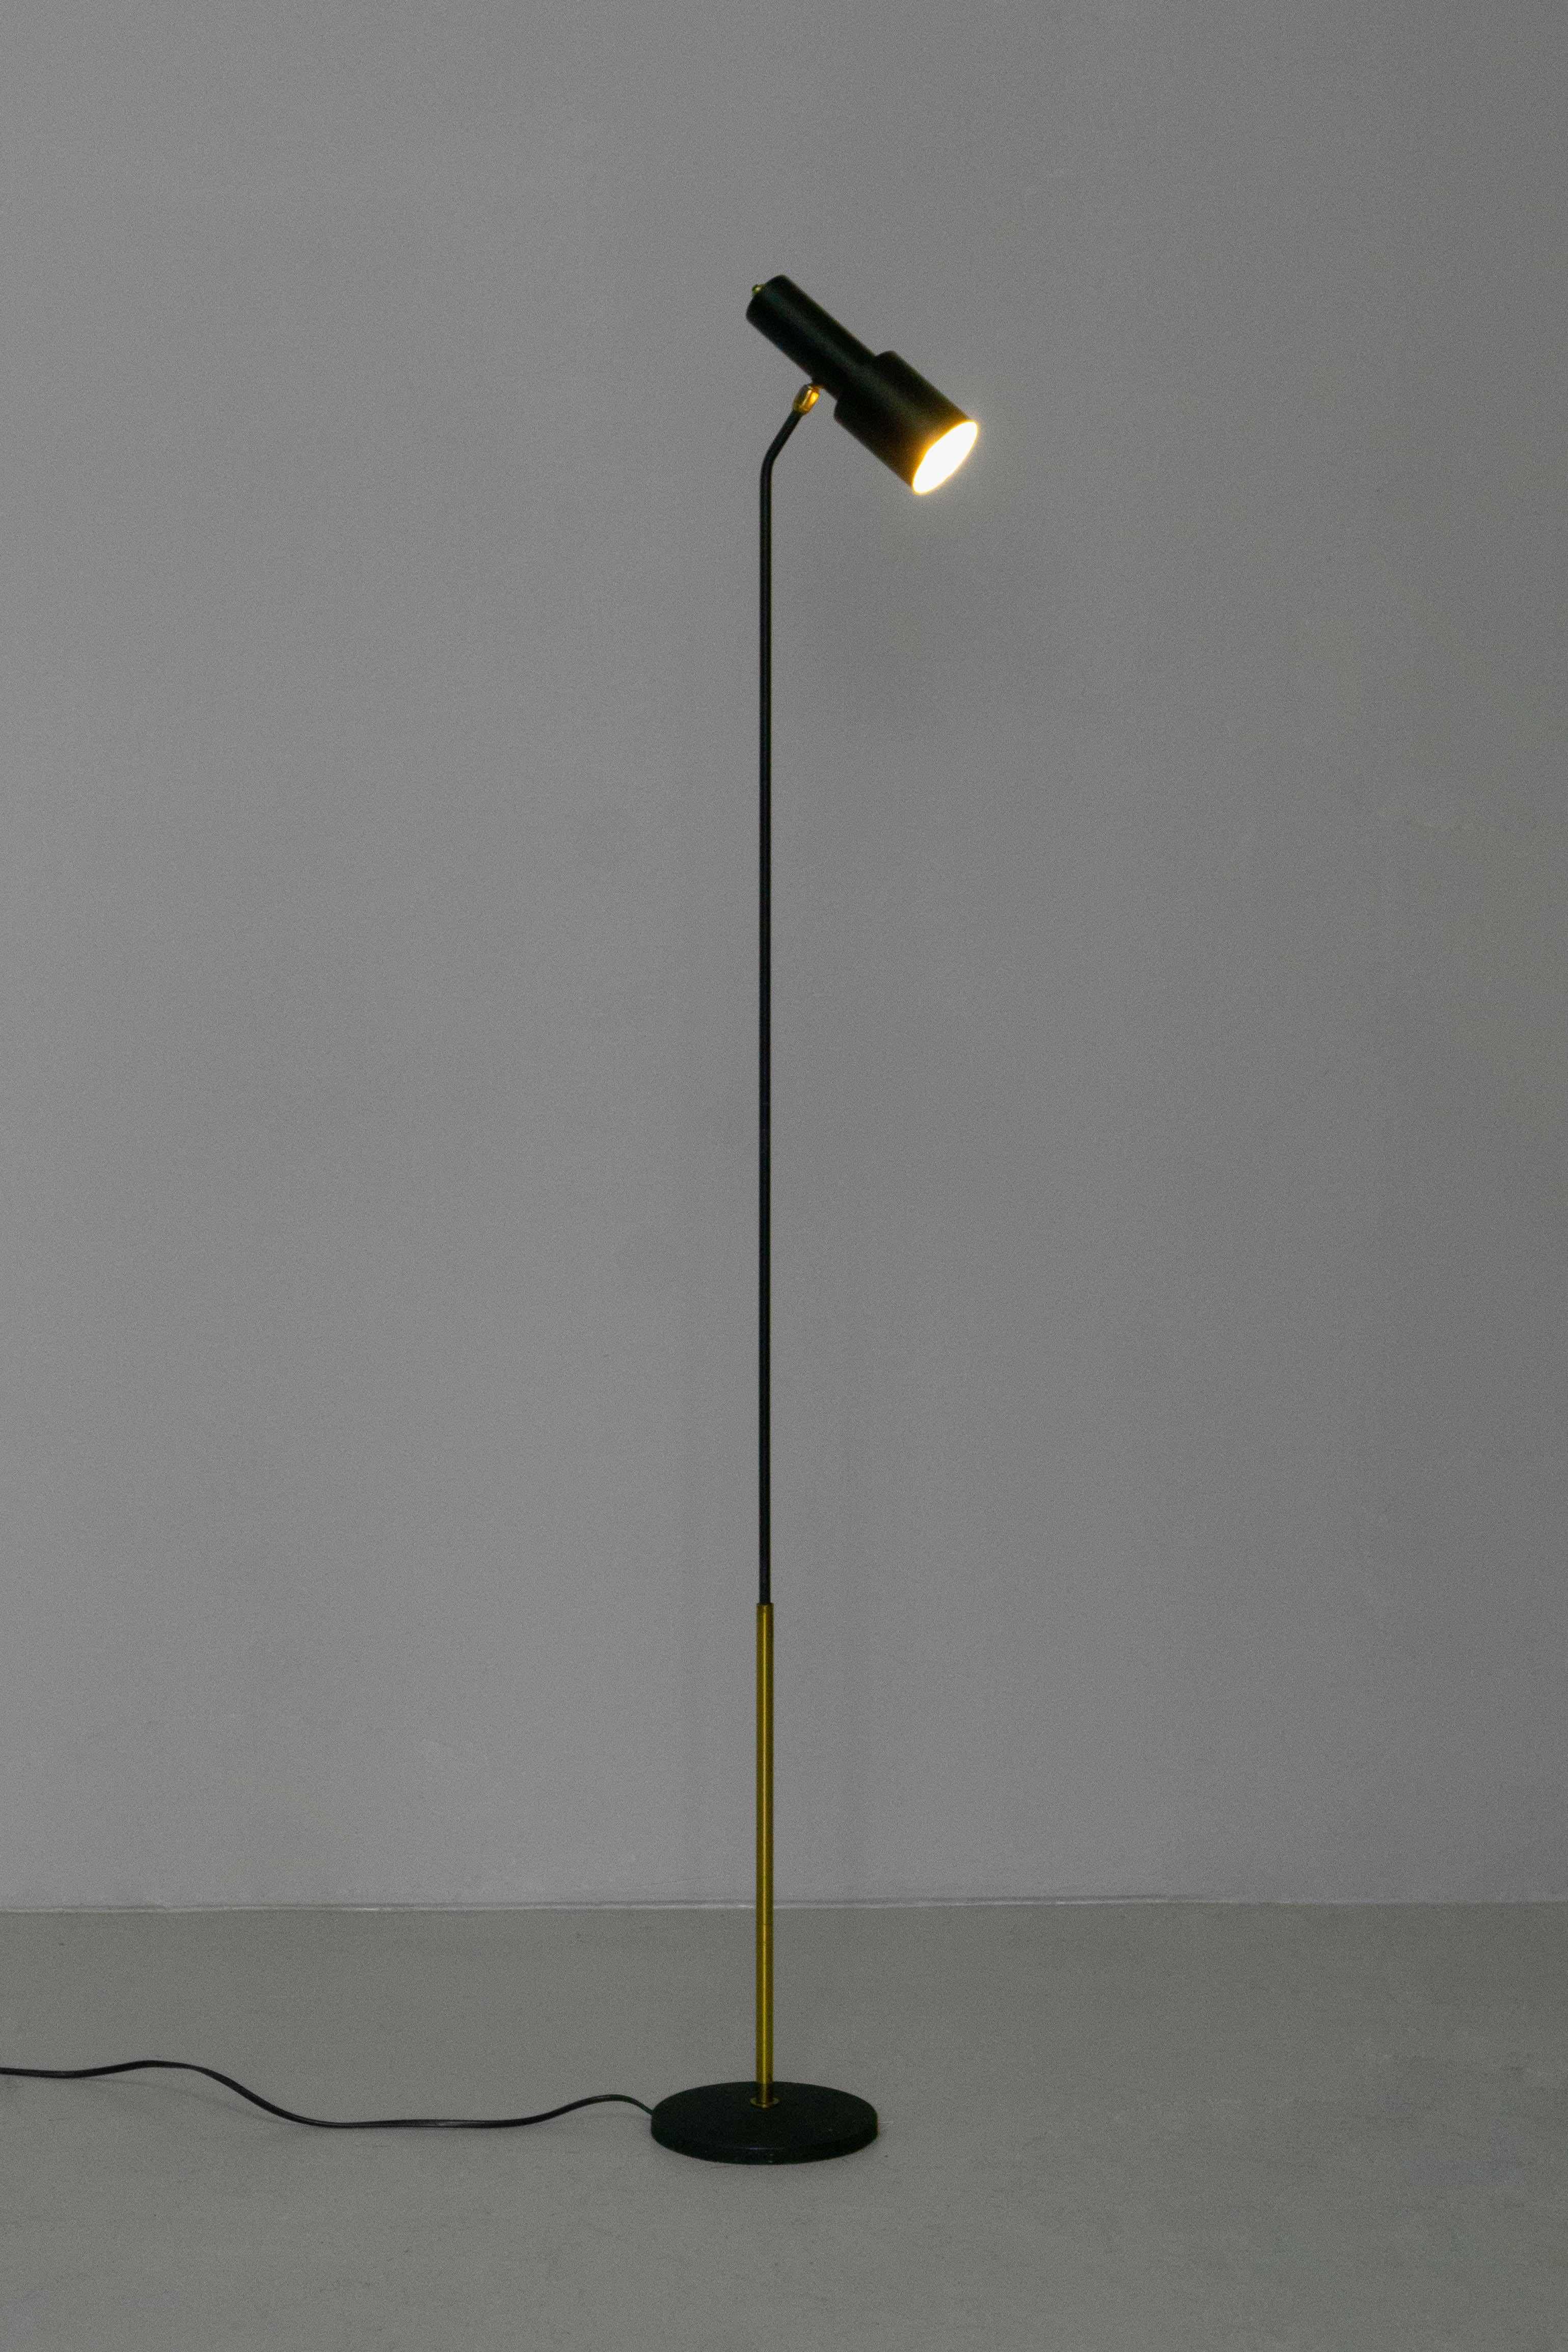 We are offering this metal floor lamp designed by Max Ingrand/Fontana Arte. 

Max Ingrand has been an important art director, creator and inspirer of major pieces including a series of lights and mirrors of Fontana Arte in the 1950s and 60s.